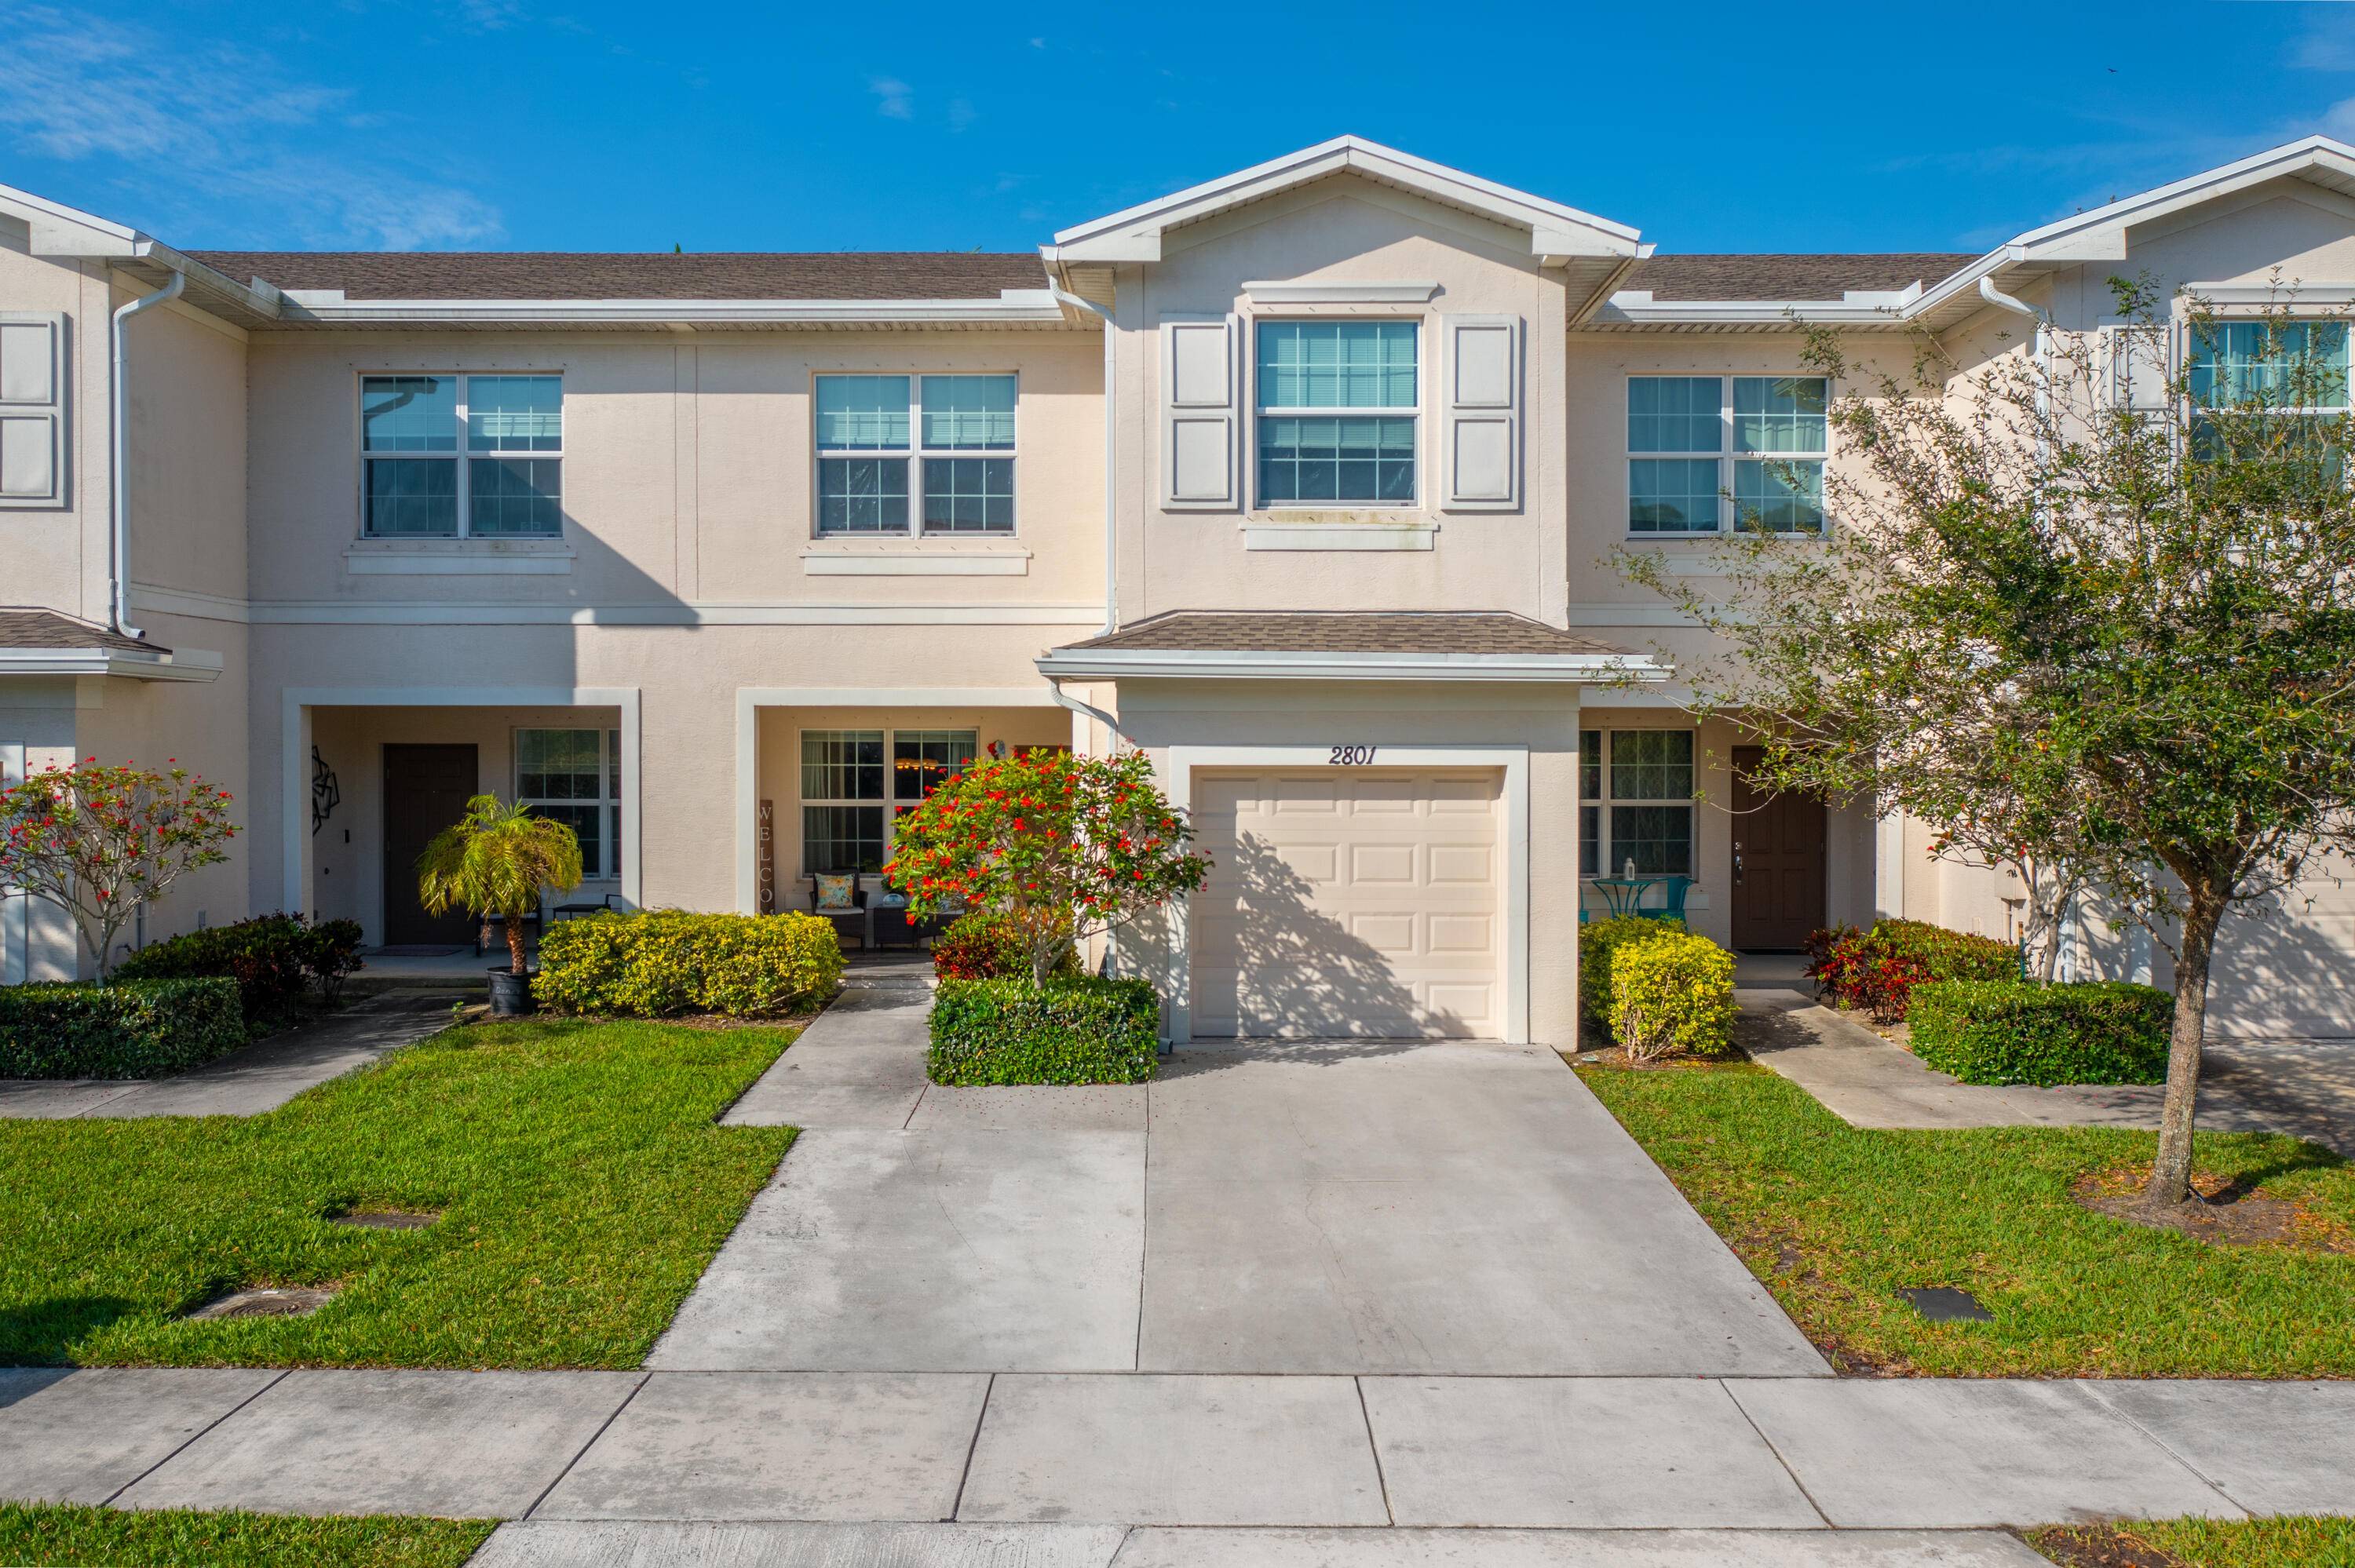 Come see this Beautiful and Well Maintained Townhome, Built in 2018 in the Desirable Community of VIZCAYA FALLS.